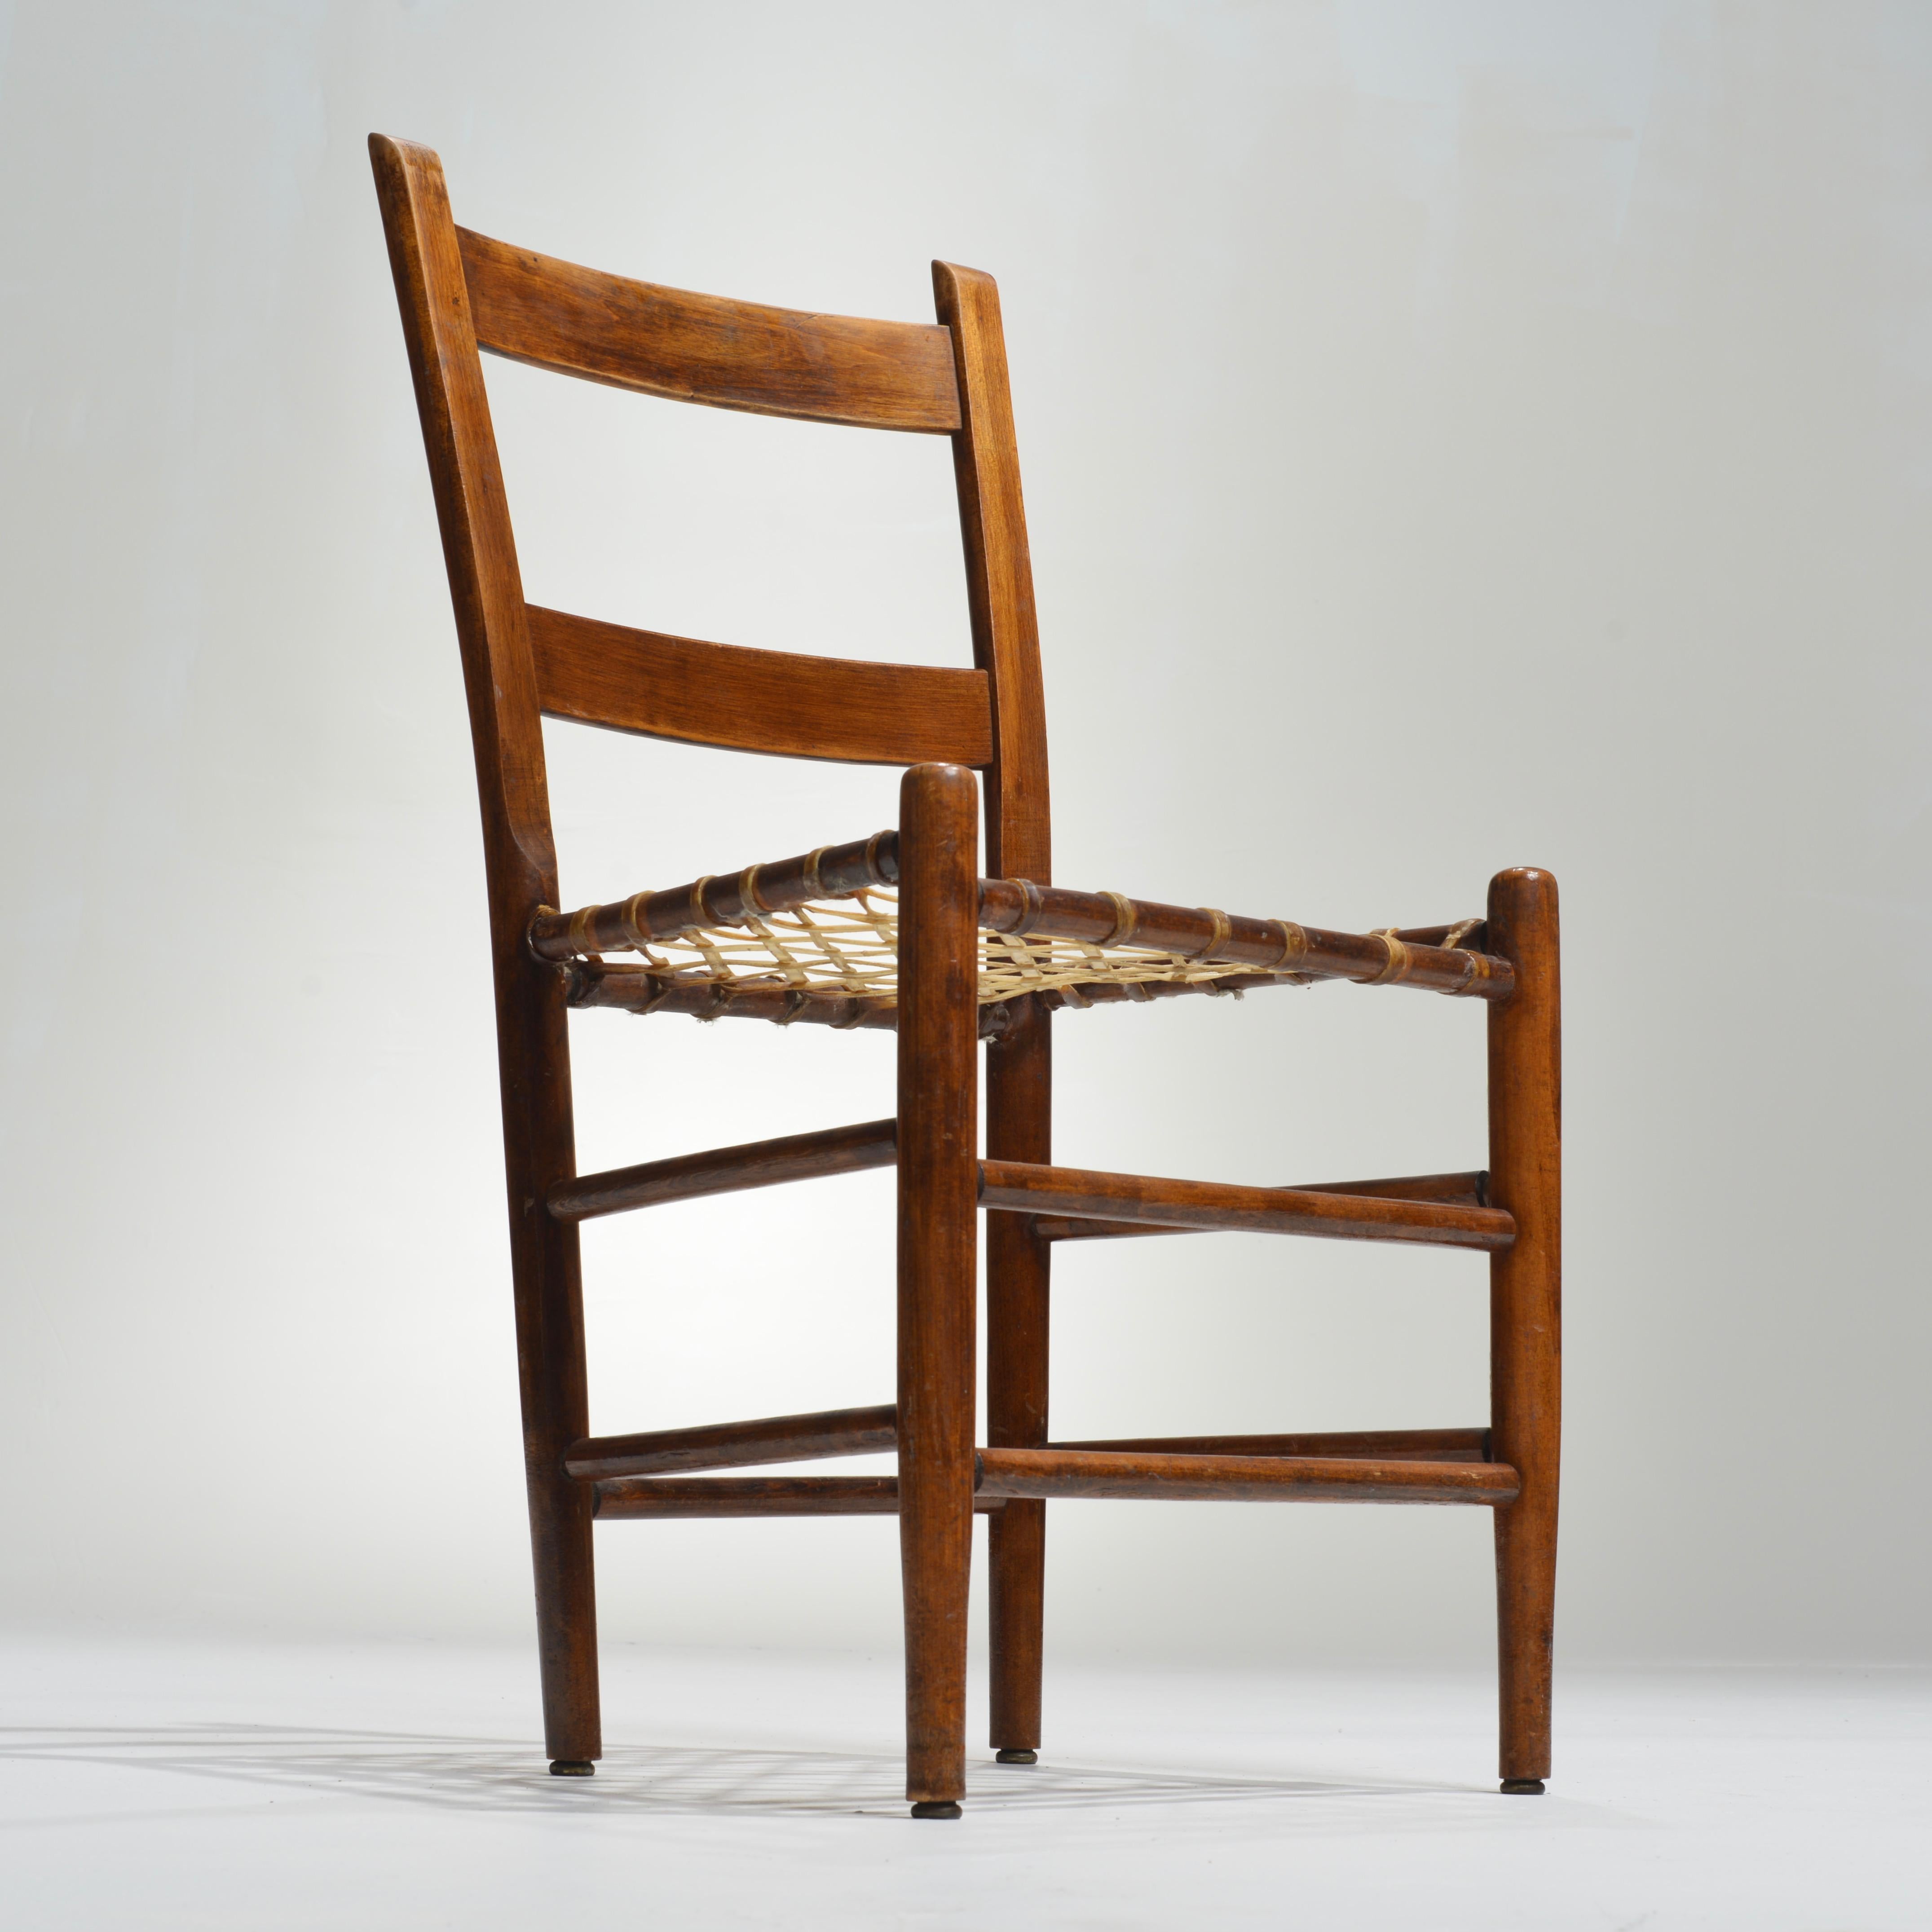 19th Century Rawhide Primitive Chairs, c. 1850 For Sale 1